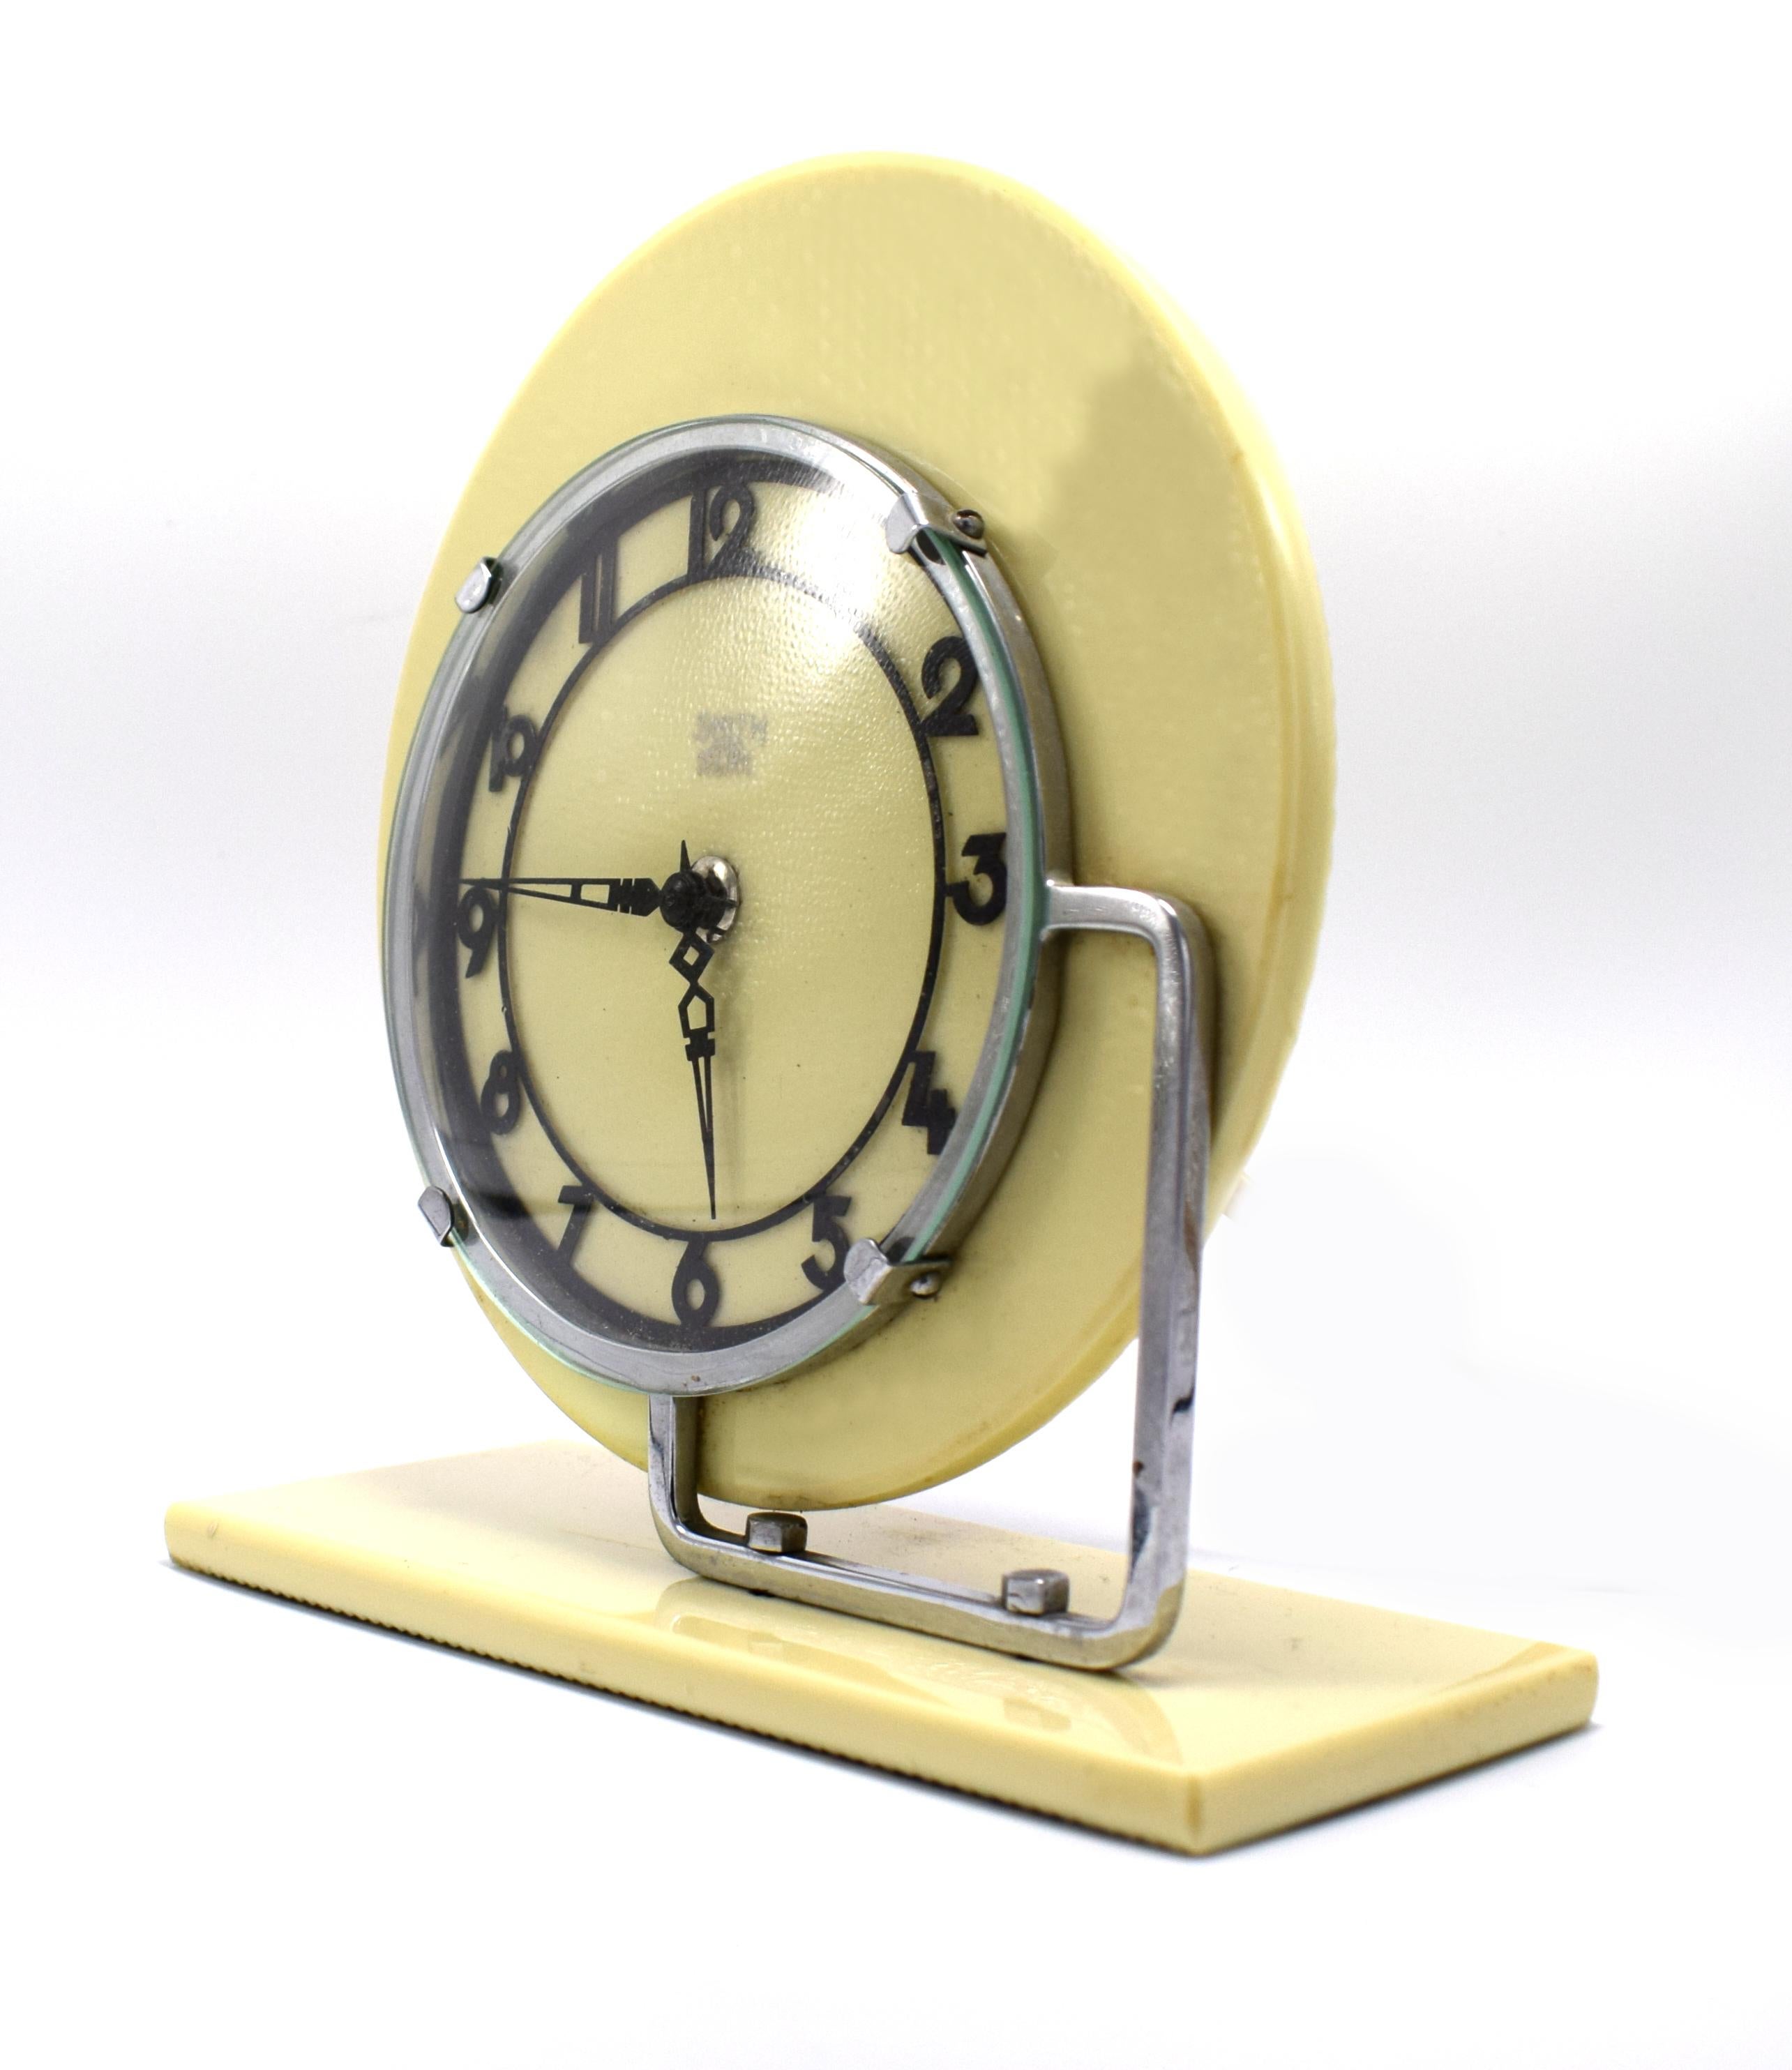 Quite a rare model, only had this clock once before in the last couple of years. Modernist 1930s Art Deco Clock by English makers GEC, runs on electric, so plug in and go! Pale yellow vitrolite (compressed glass) with chrome bezel and black enameled